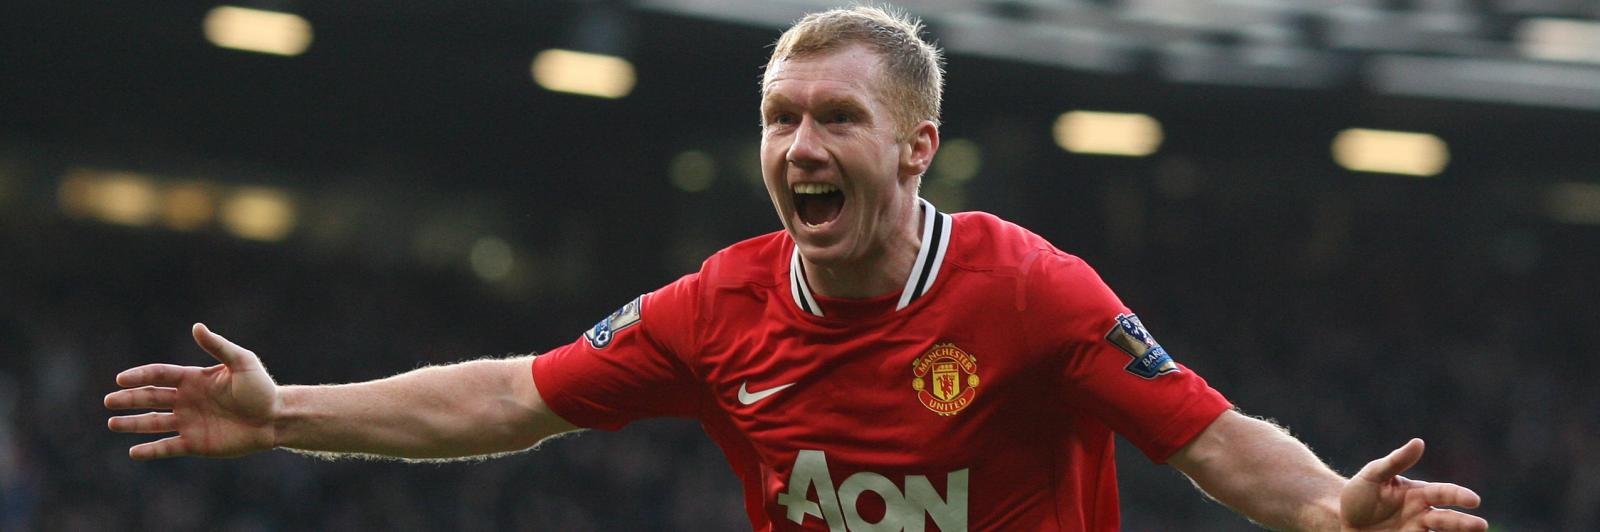 Paul Scholes’ Manchester United Career in Numbers